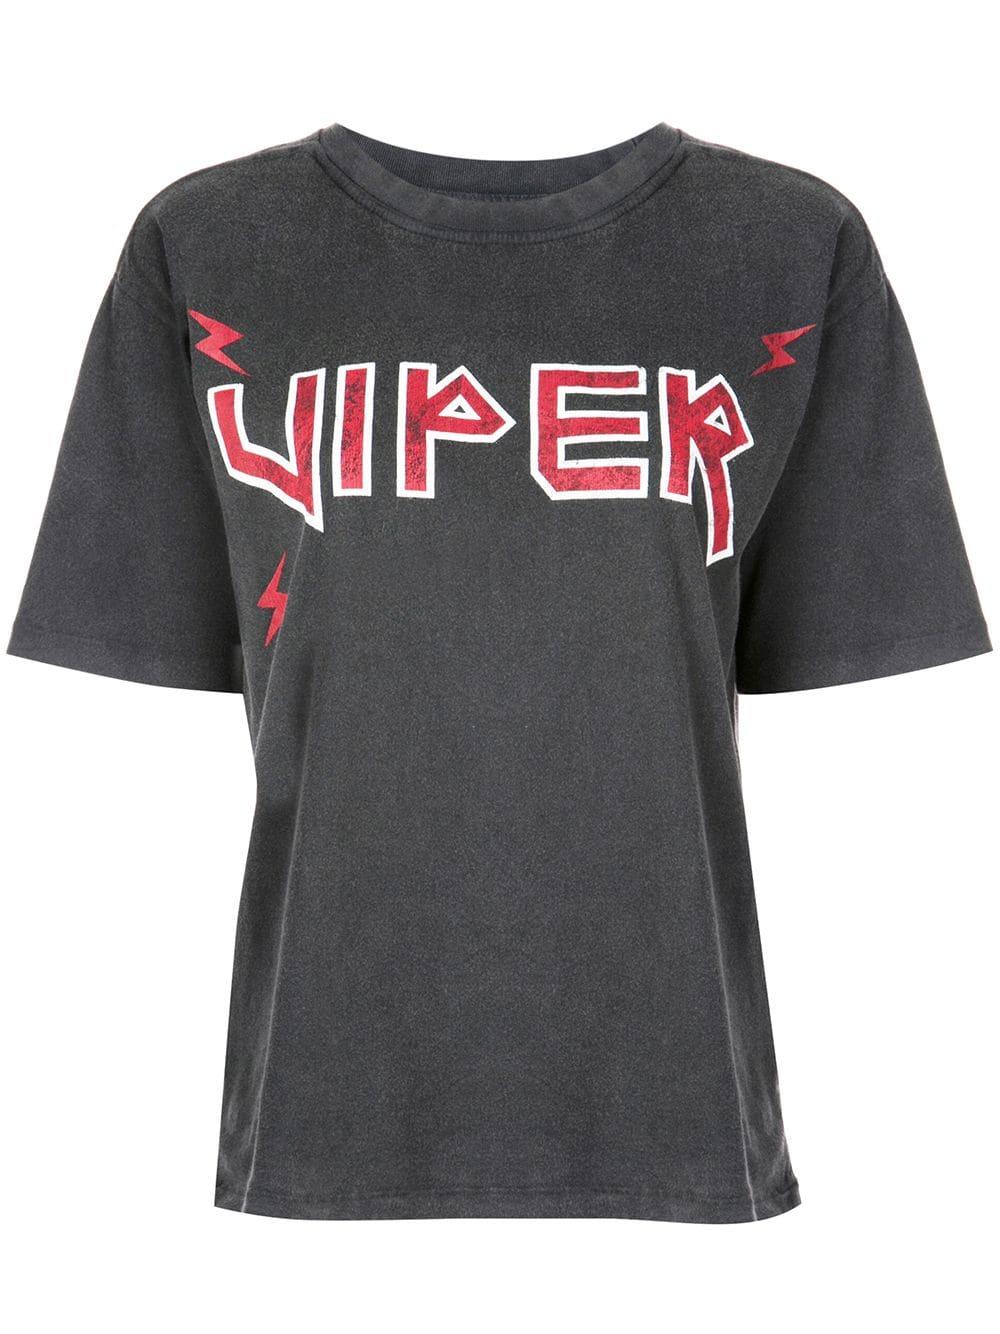 Anine Cotton Viper T-shirt in Grey (Gray) Lyst